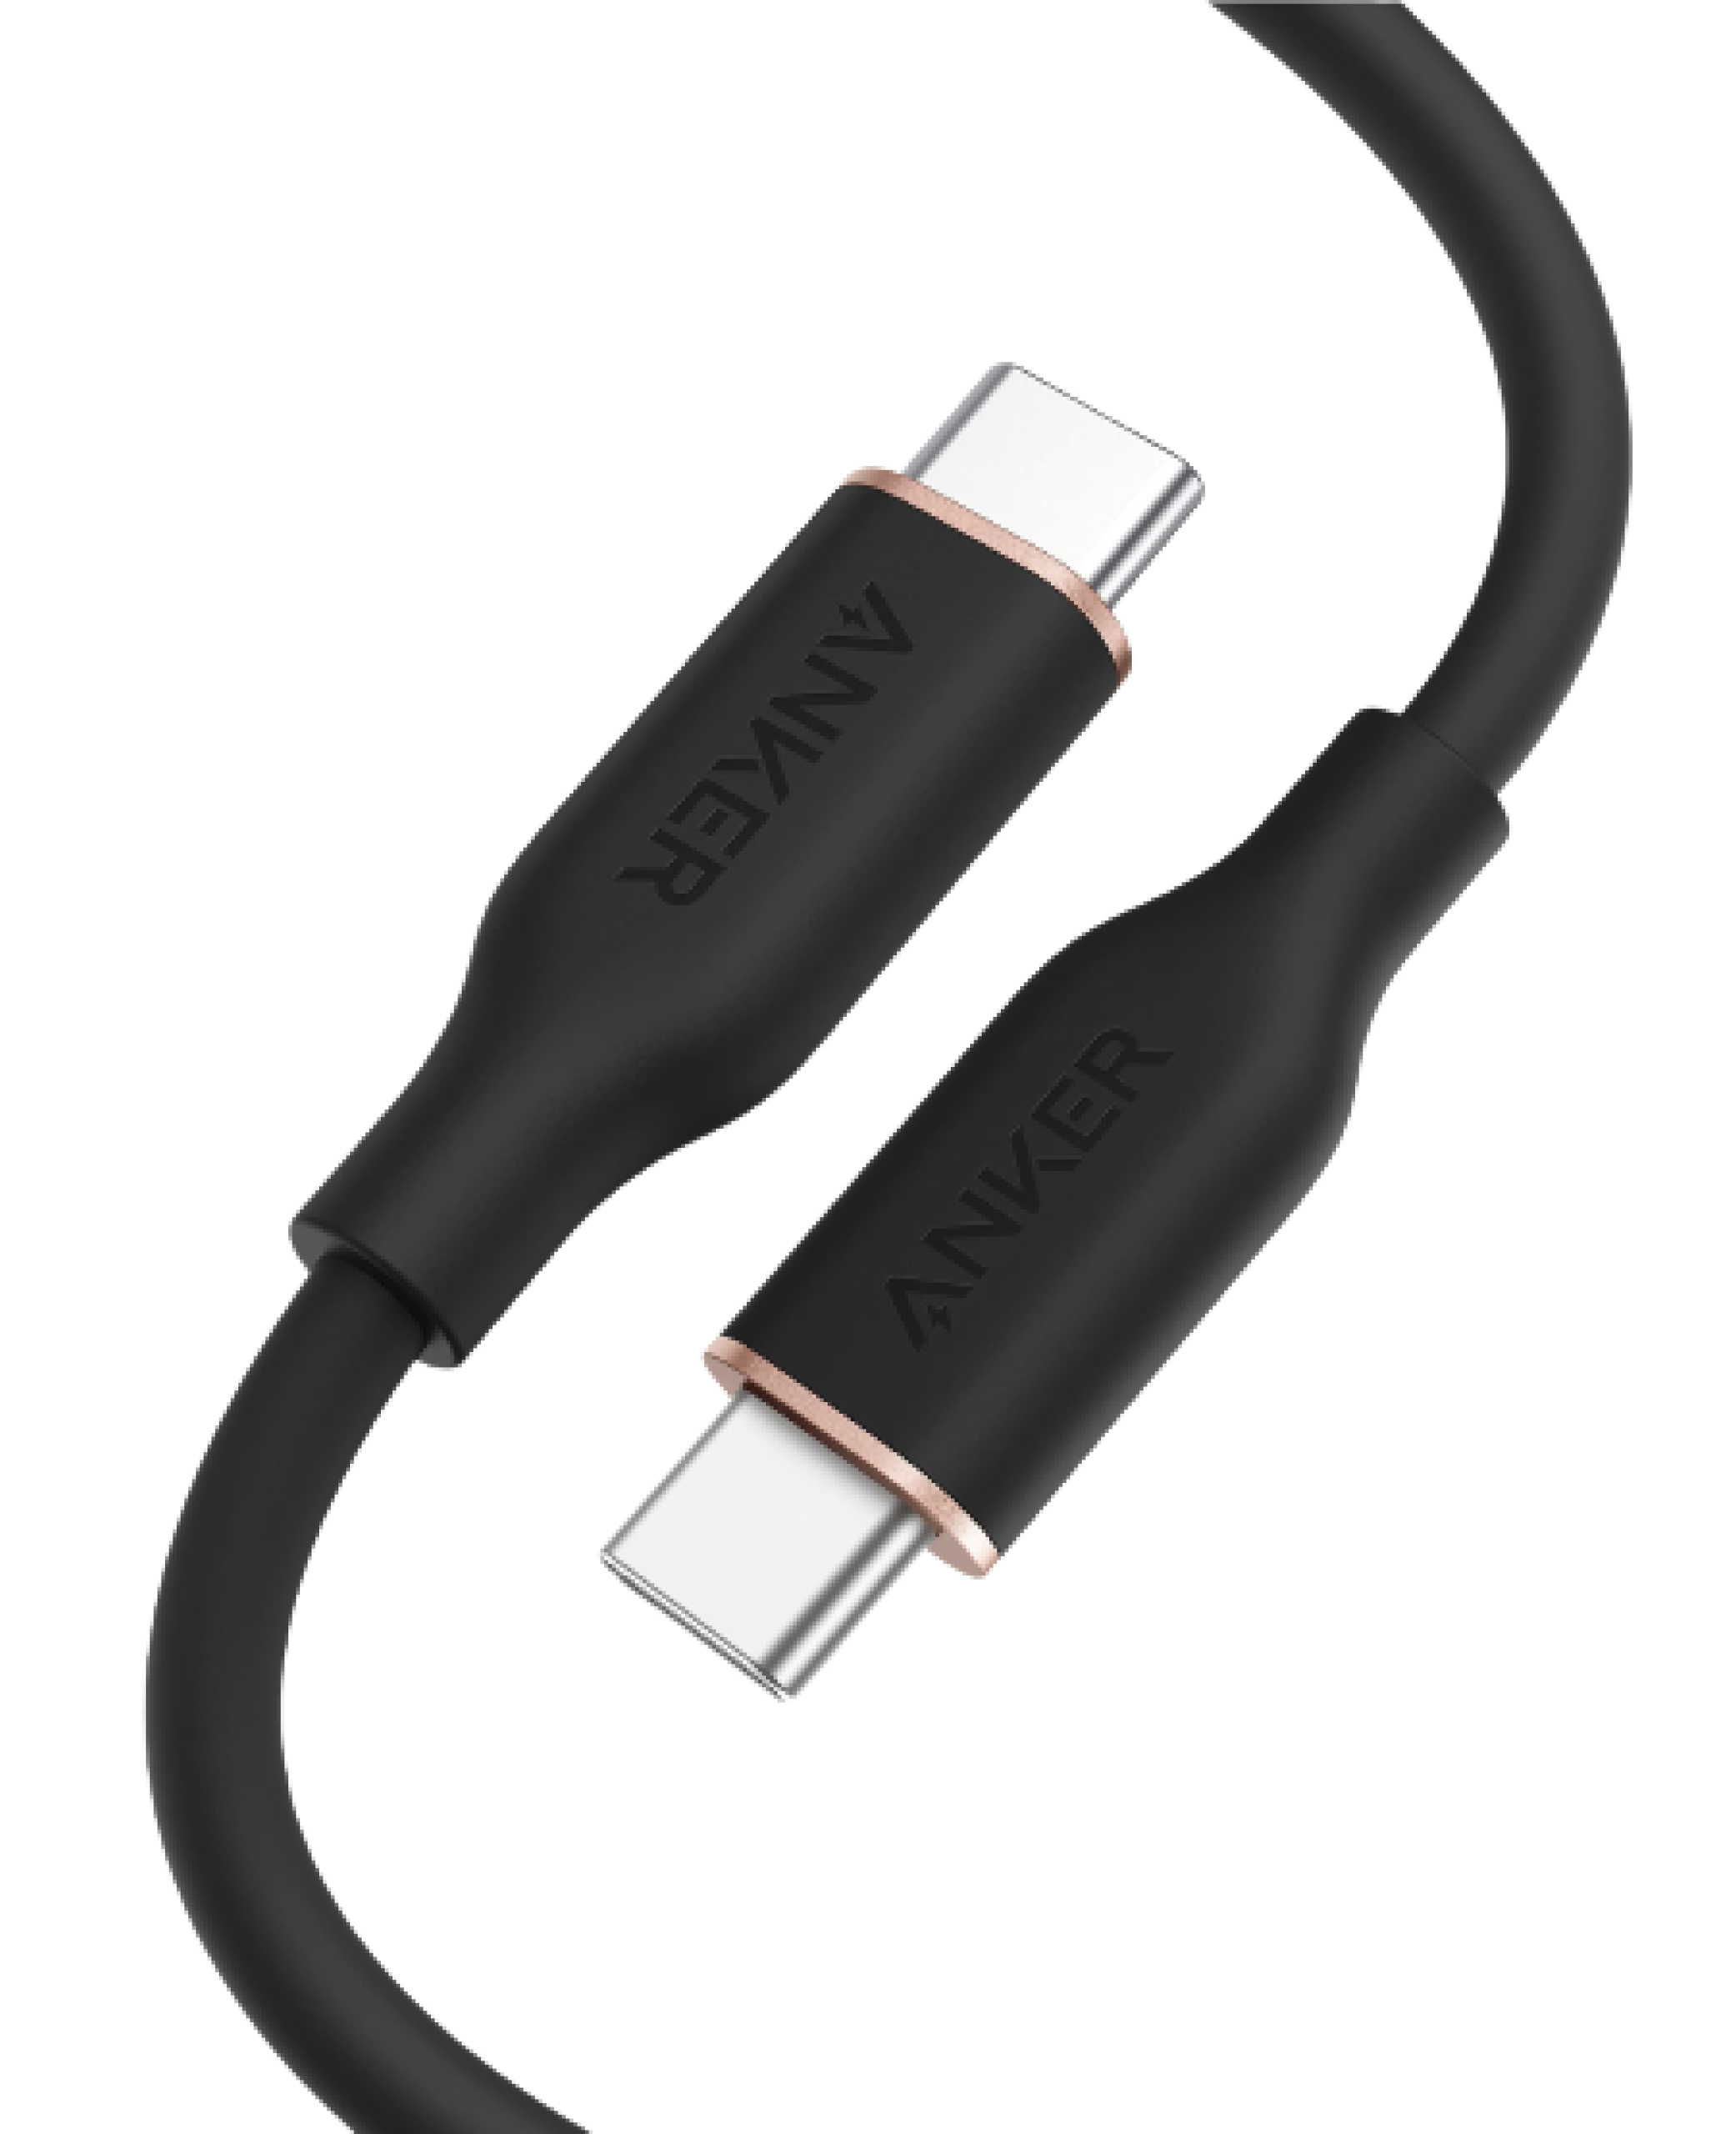 iPhone 12 Charger Cable: Unleash the Speed - Anker US